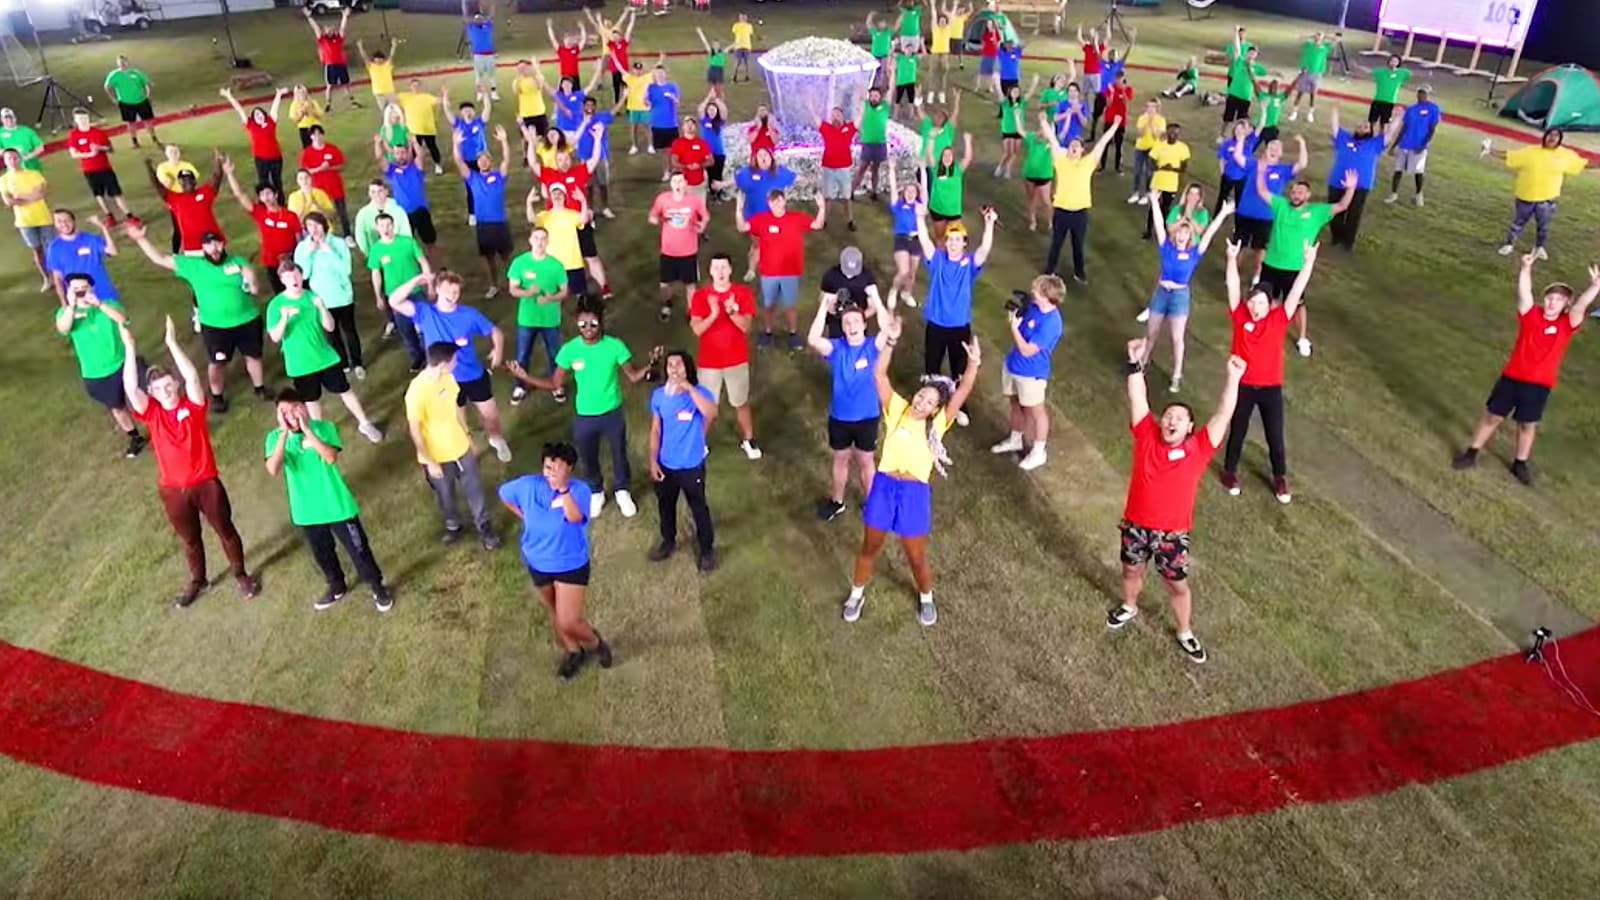 100 people in a big circle as part of a MrBeast video